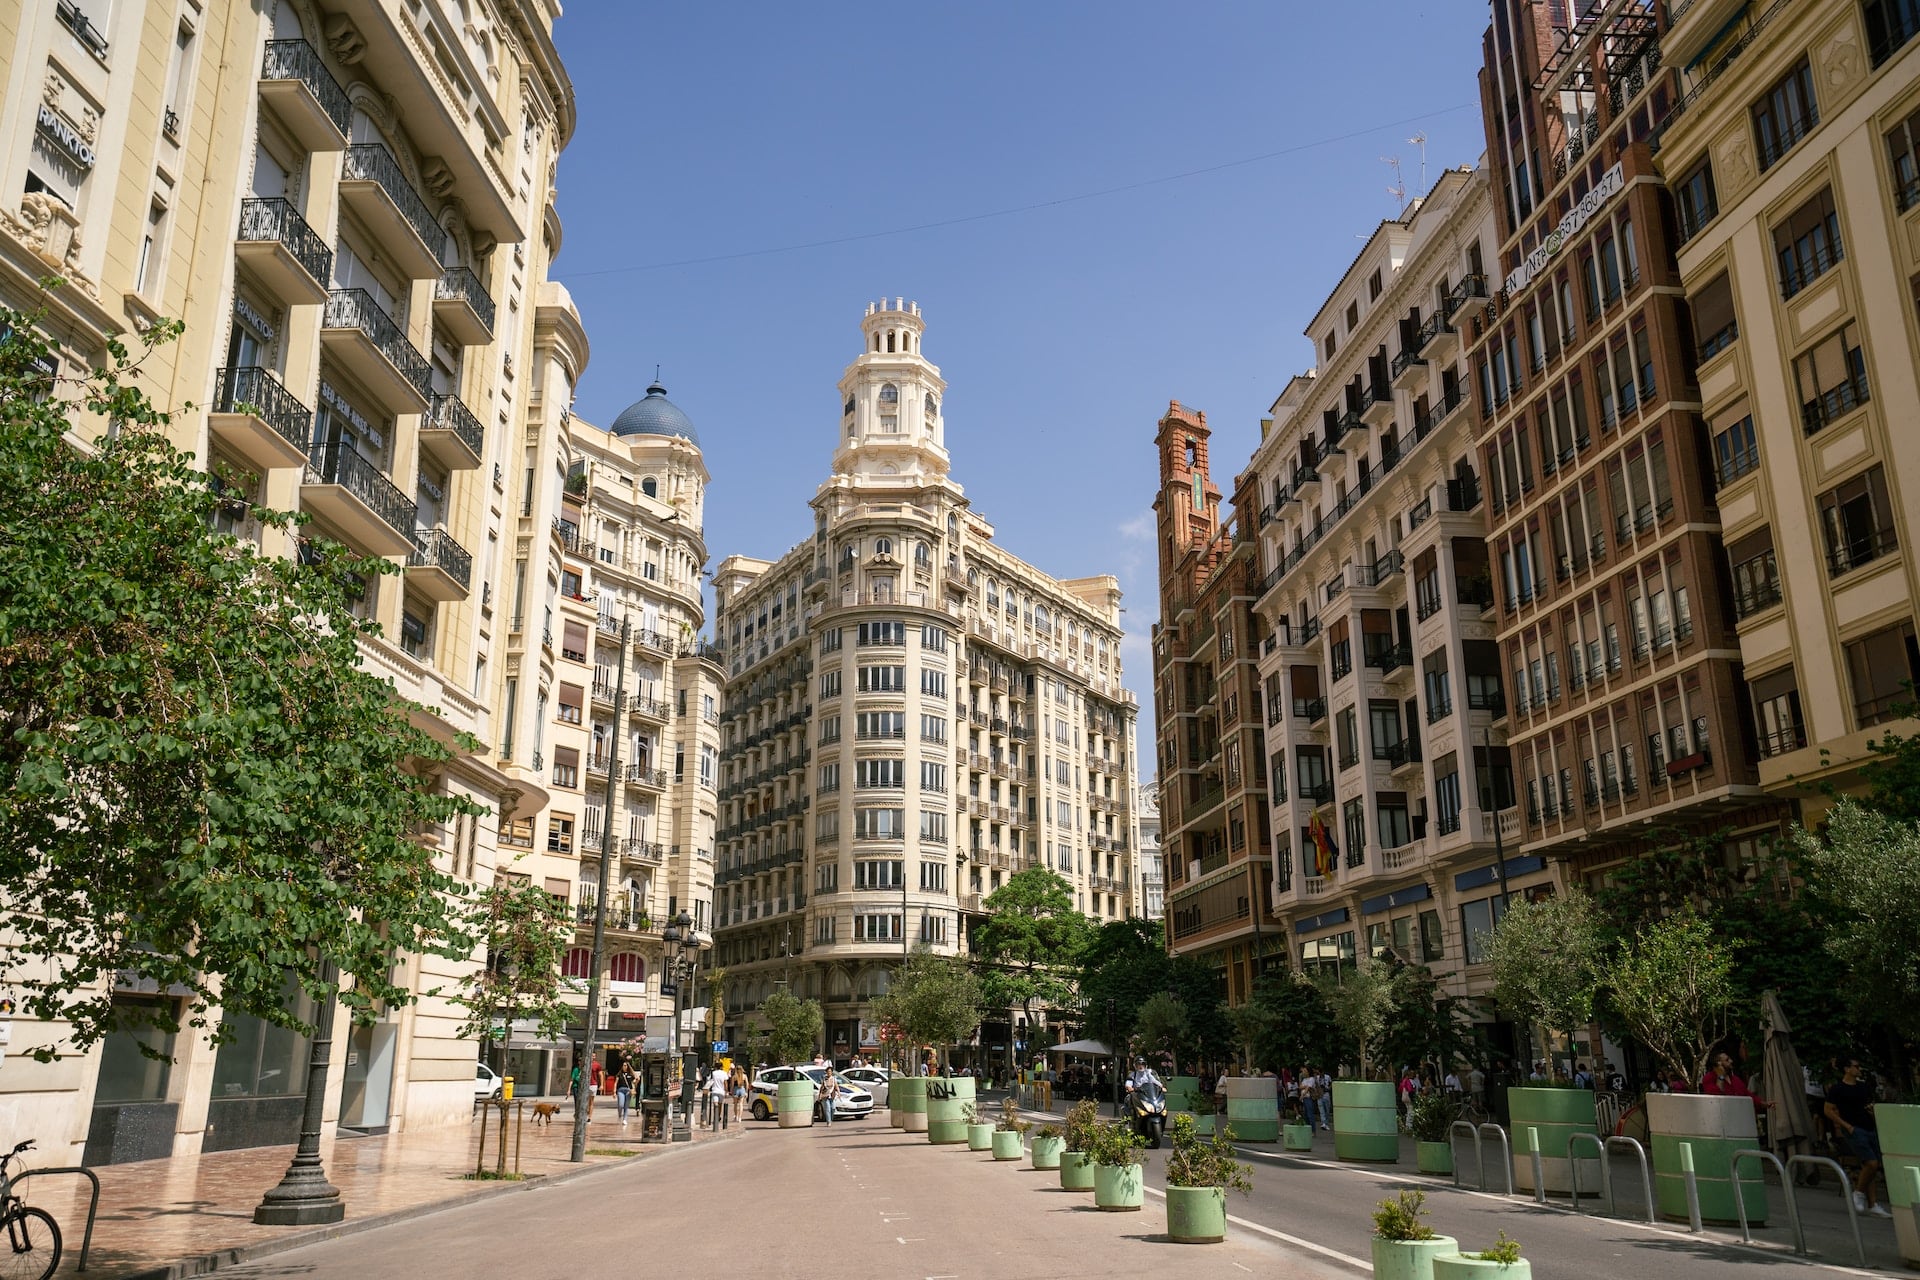 Ciutat Vella, found in the central part of the city, is an interesting place to stay for those who are interested in exploring and understanding Valencia's past